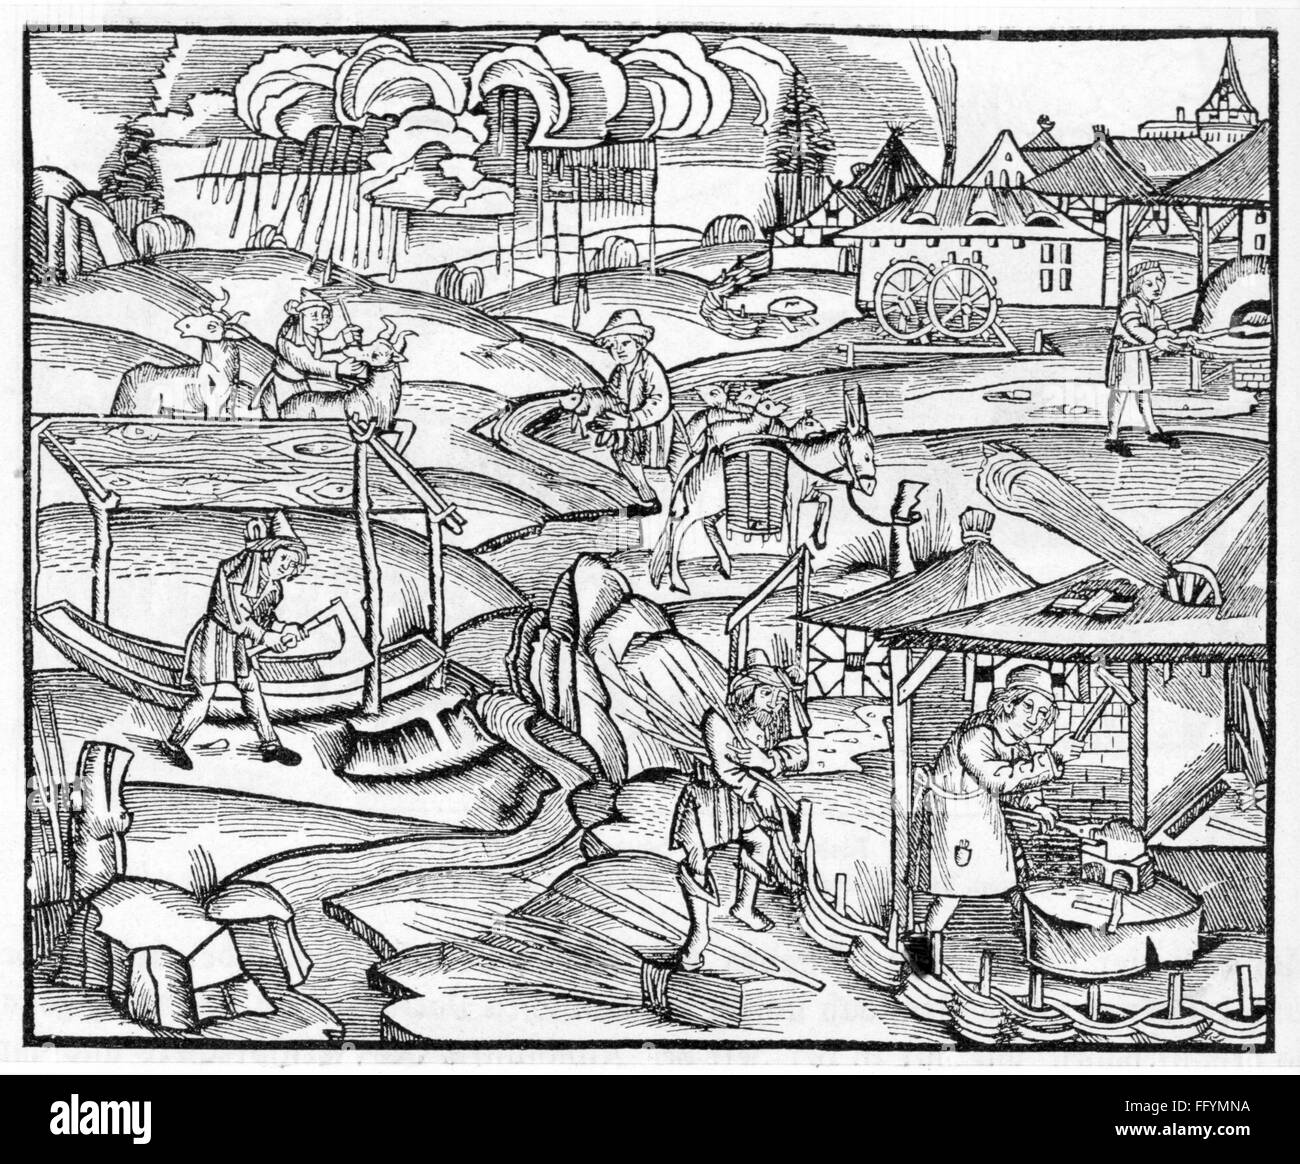 agriculture, people at work, different occupations, woodcut, from: Publius Vergilius Maro (70 - 19 BC), 'Opera', editor: Sebastian Brant, print: Hans Grüninger, Strasbourg, 1502, Additional-Rights-Clearences-Not Available Stock Photo